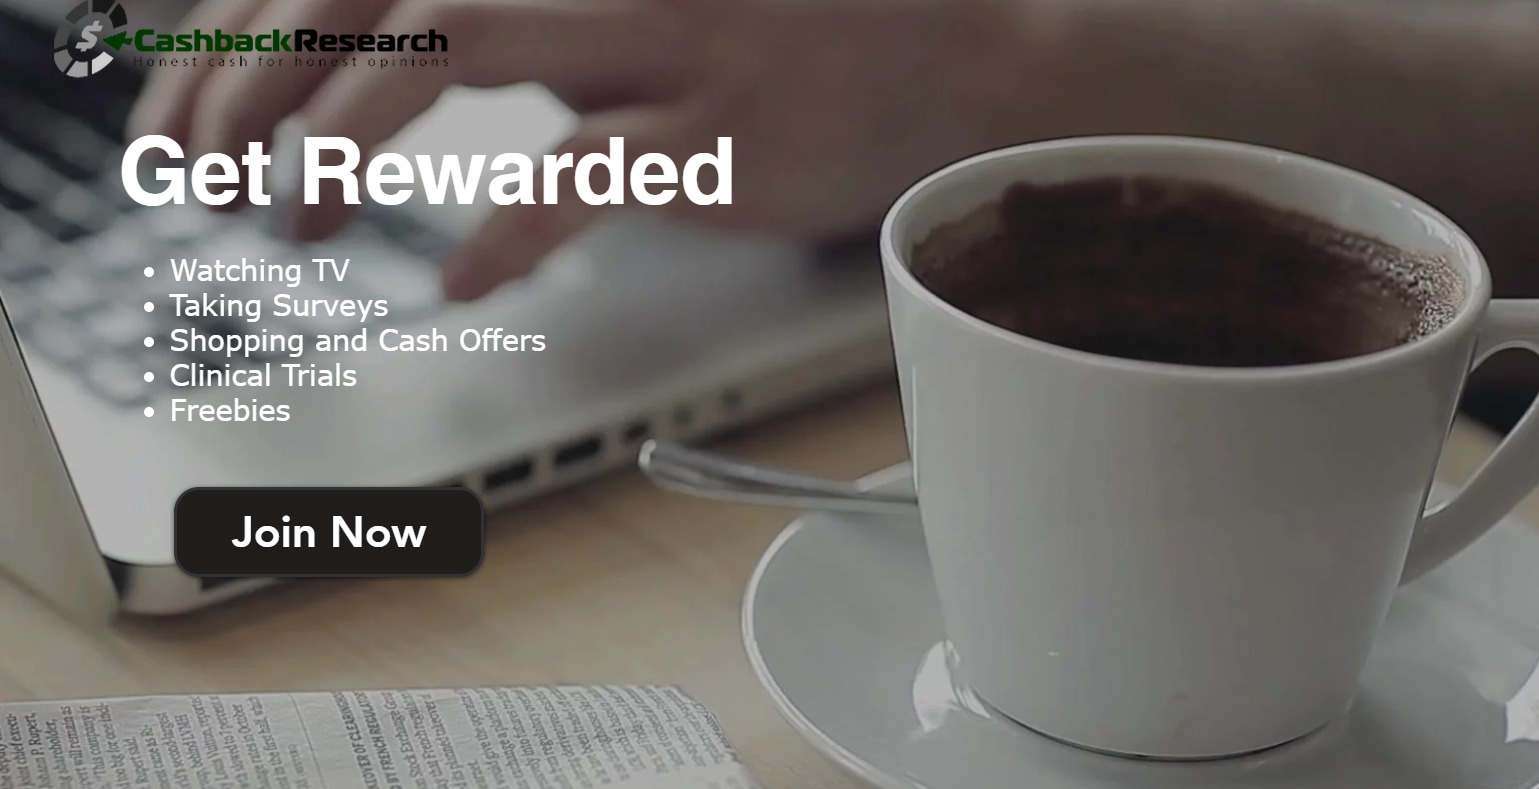 cashback research review